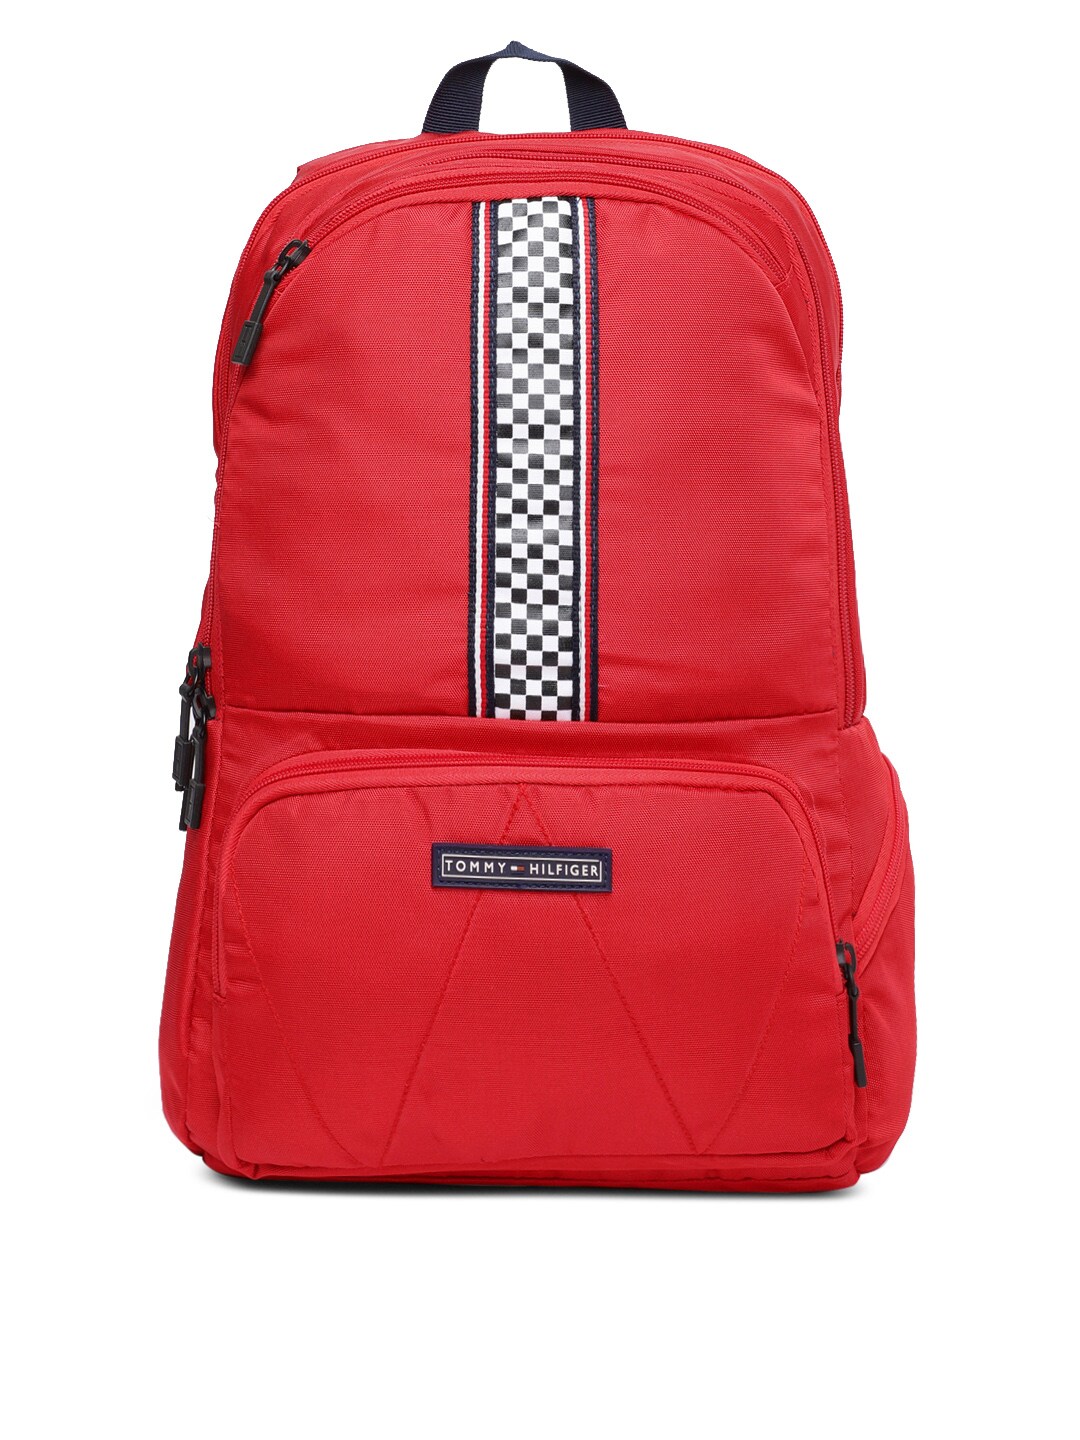 Tommy Hilfiger Unisex Red Solid Laptop Backpack Price in India